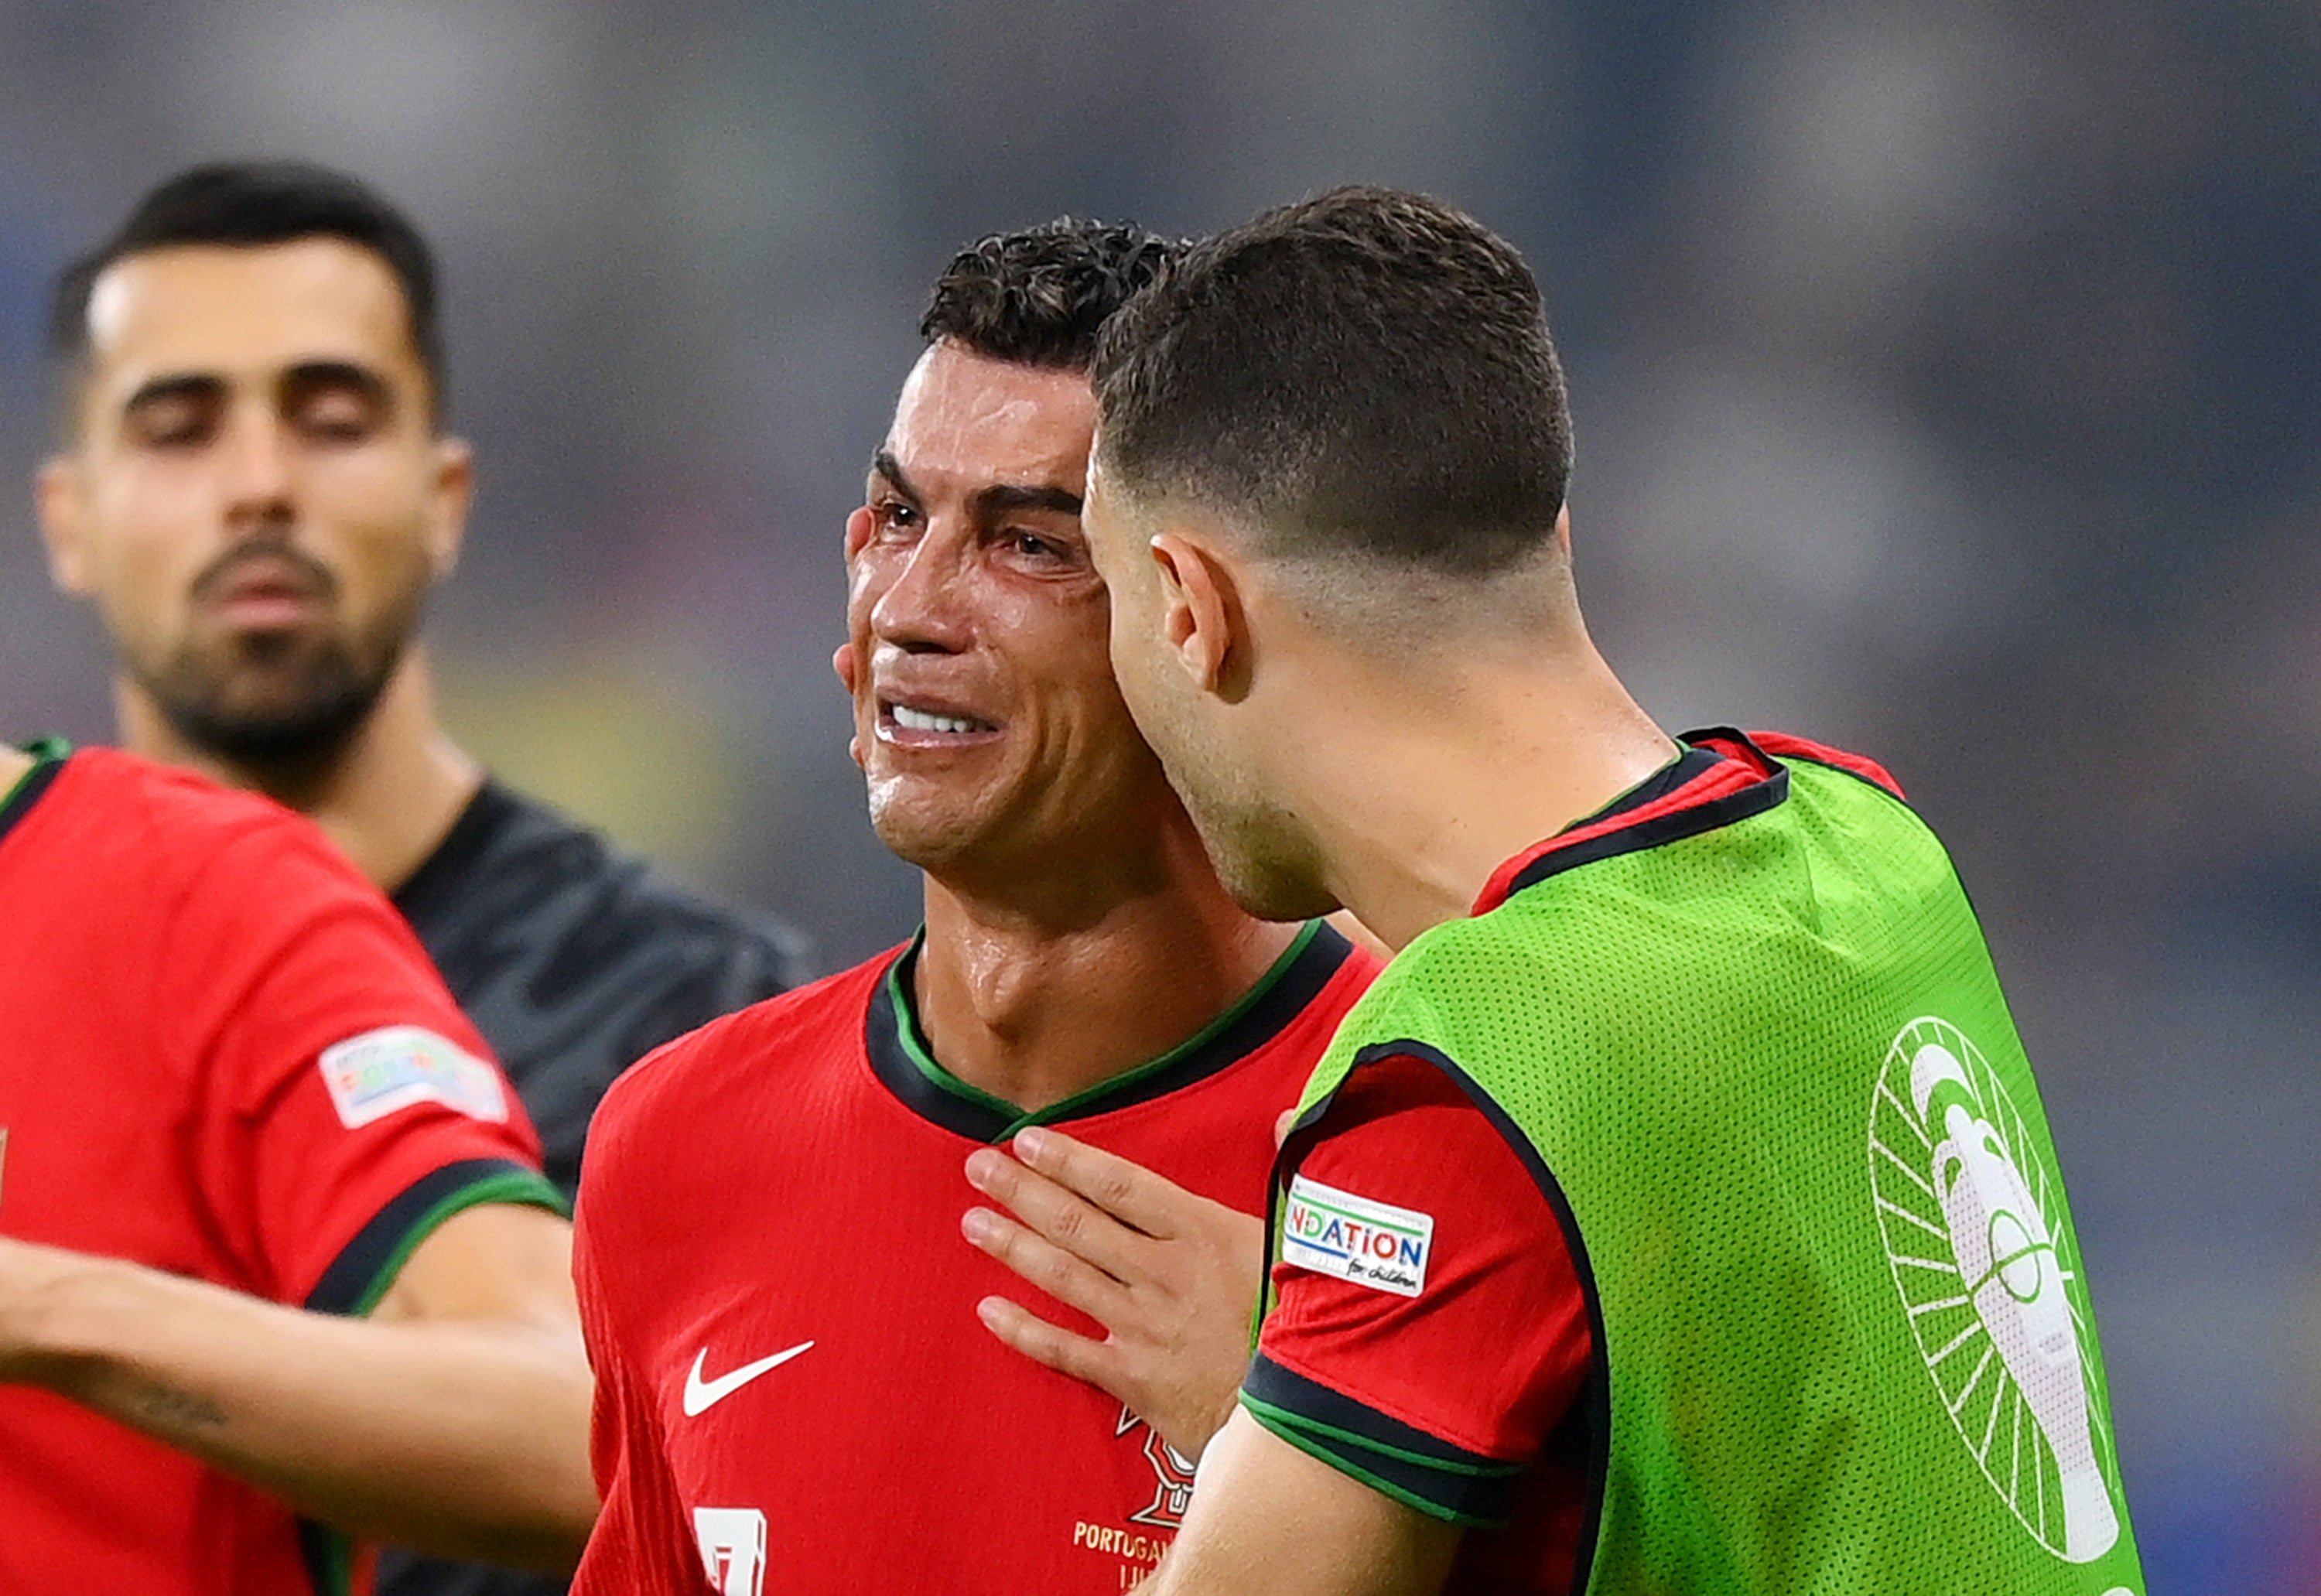 Ronaldo weeps after missing from the spot